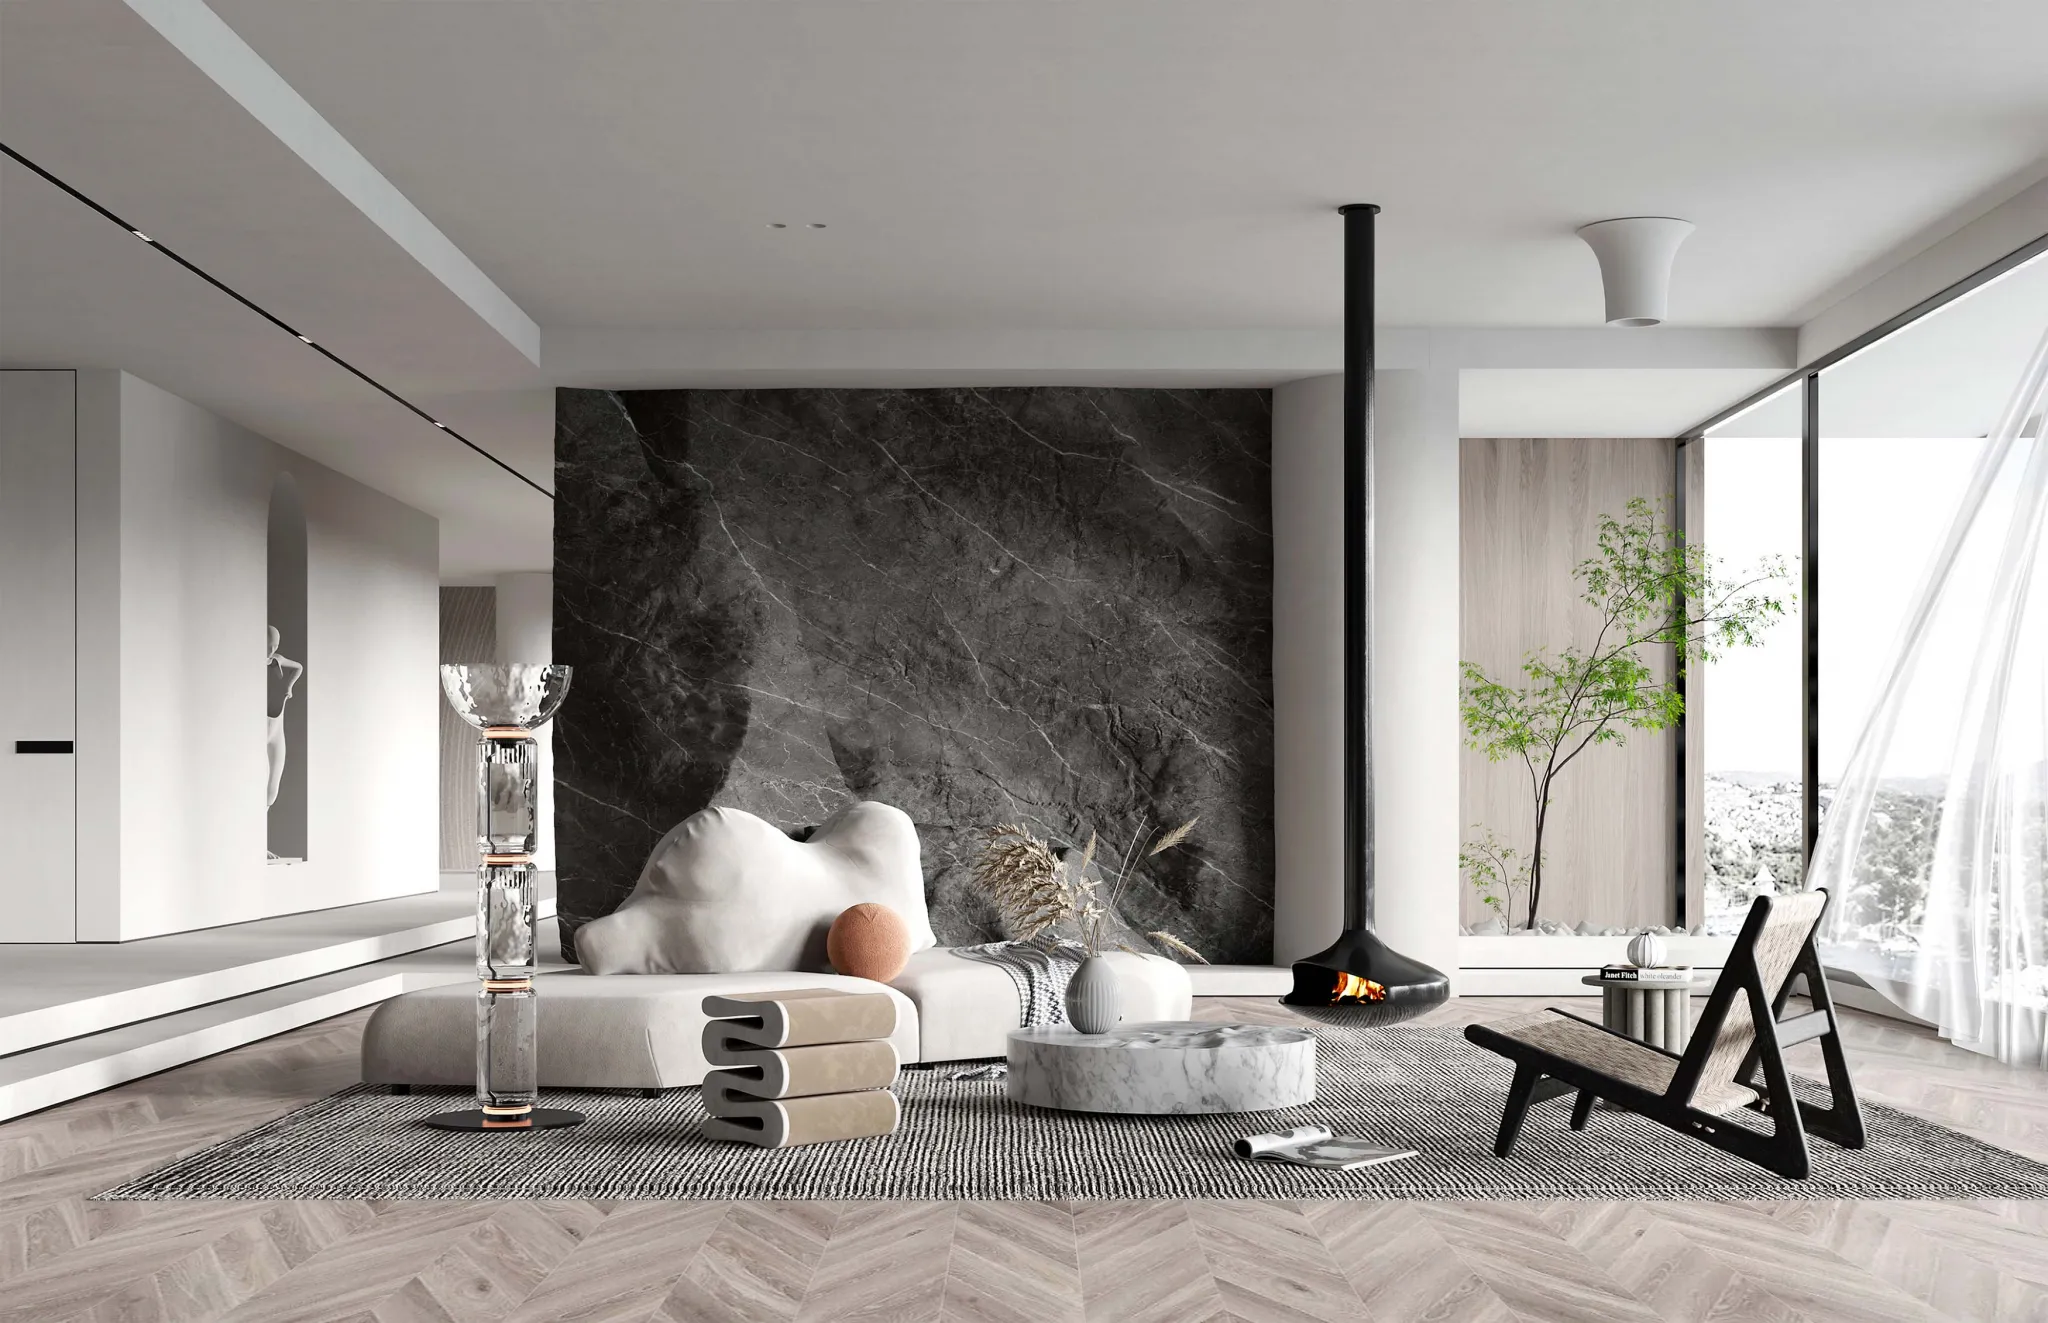 HOUSE SPACE 3D SCENES – LIVING ROOM – 0170